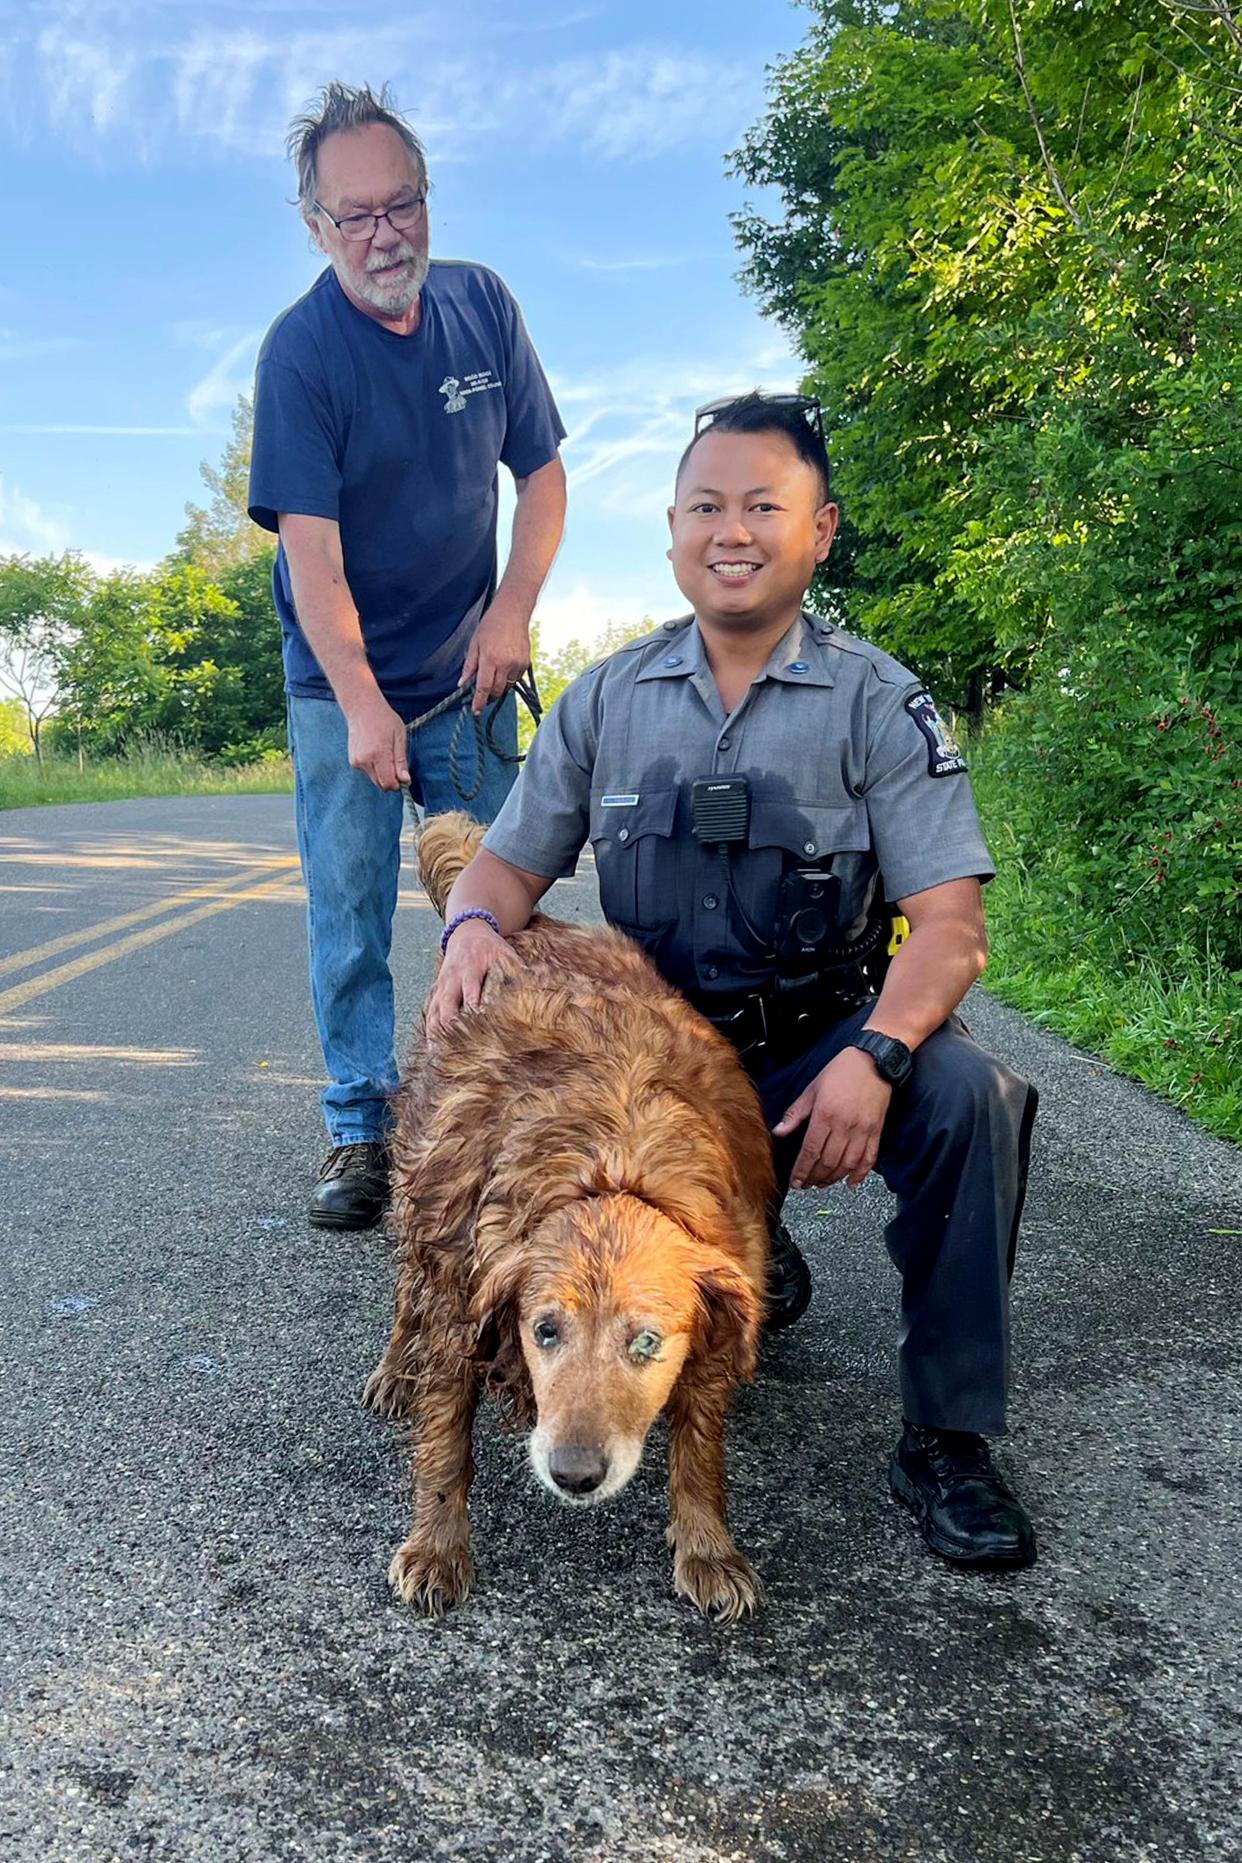 In this image provided by the New York State Police, Trooper Jimmy Rasaphone, right, poses for a photo with 13-year-old golden retriever Lilah, and her owner Rudy Fuehrer, after the trooper rescued her from a culvert pipe in Conklin, NY., on Sunday, June 26, 2022. 